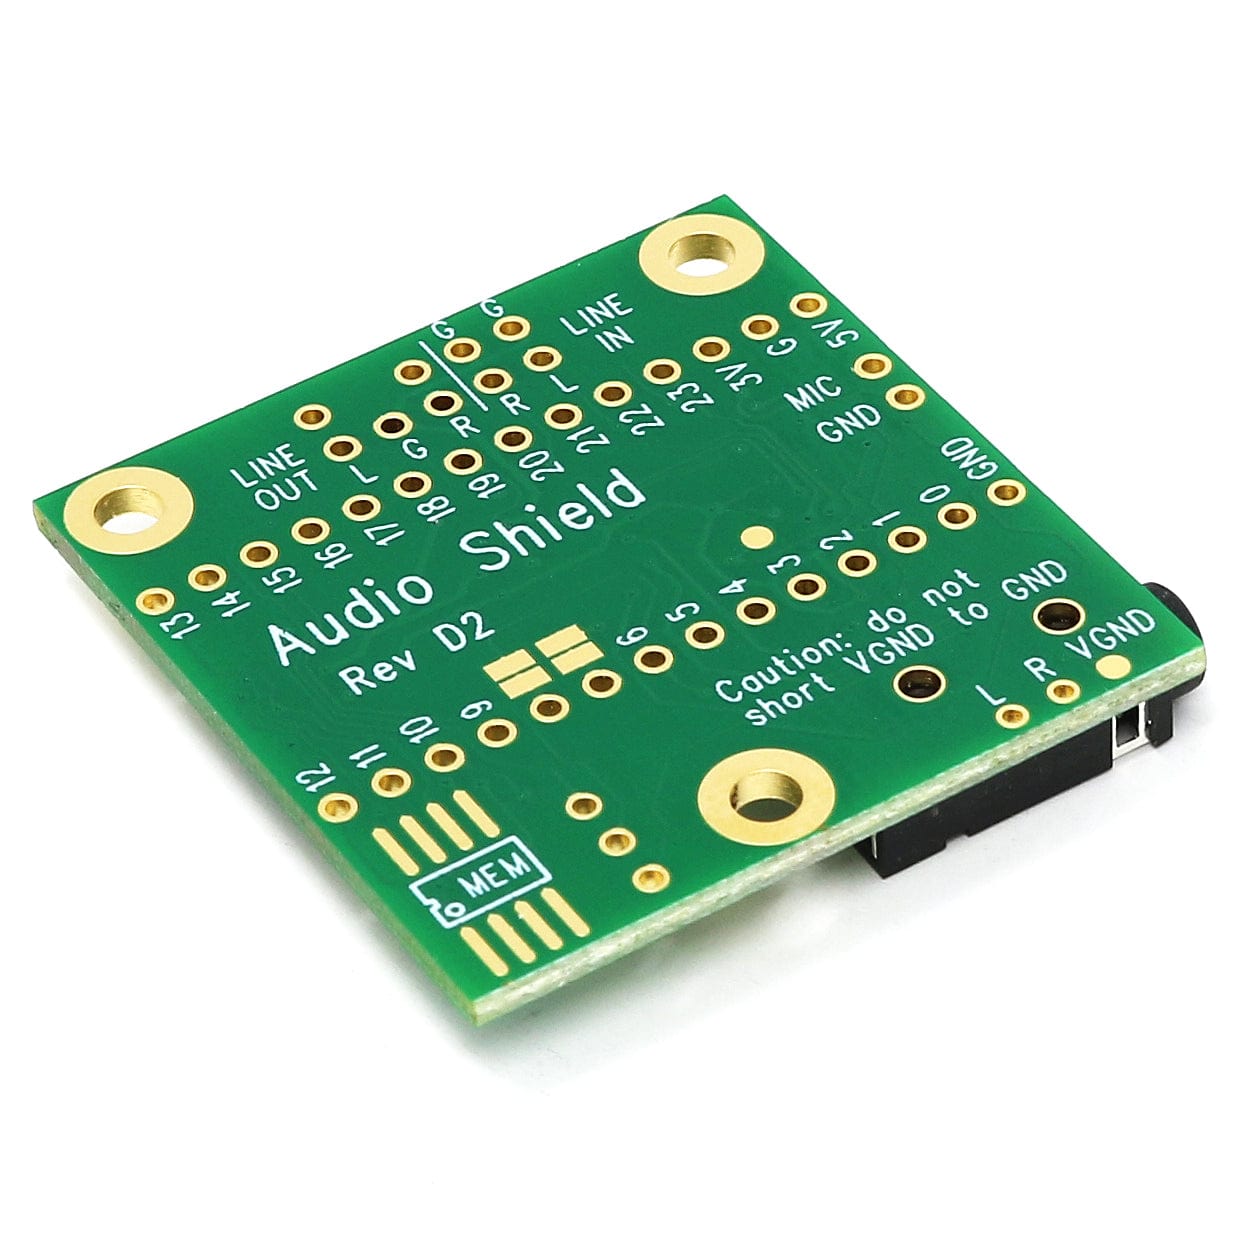 Audio Adapter Board for Teensy 4.0 (Rev D2) - The Pi Hut